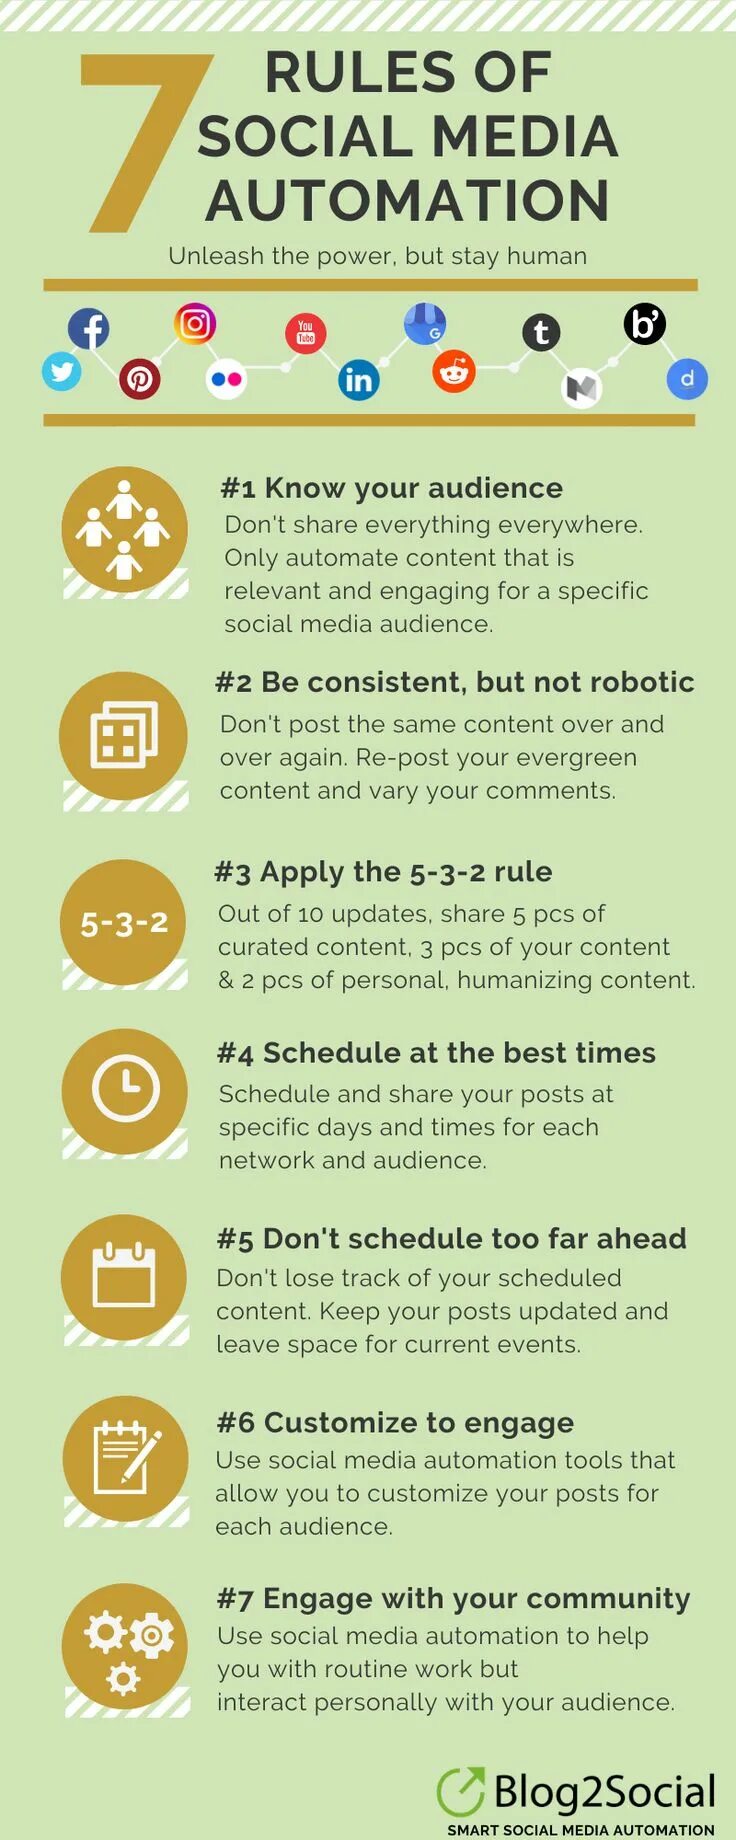 Rules in society. Social Rules. Media Rules. Social Media marketing Rules Strategy. 7 Rules infographic.